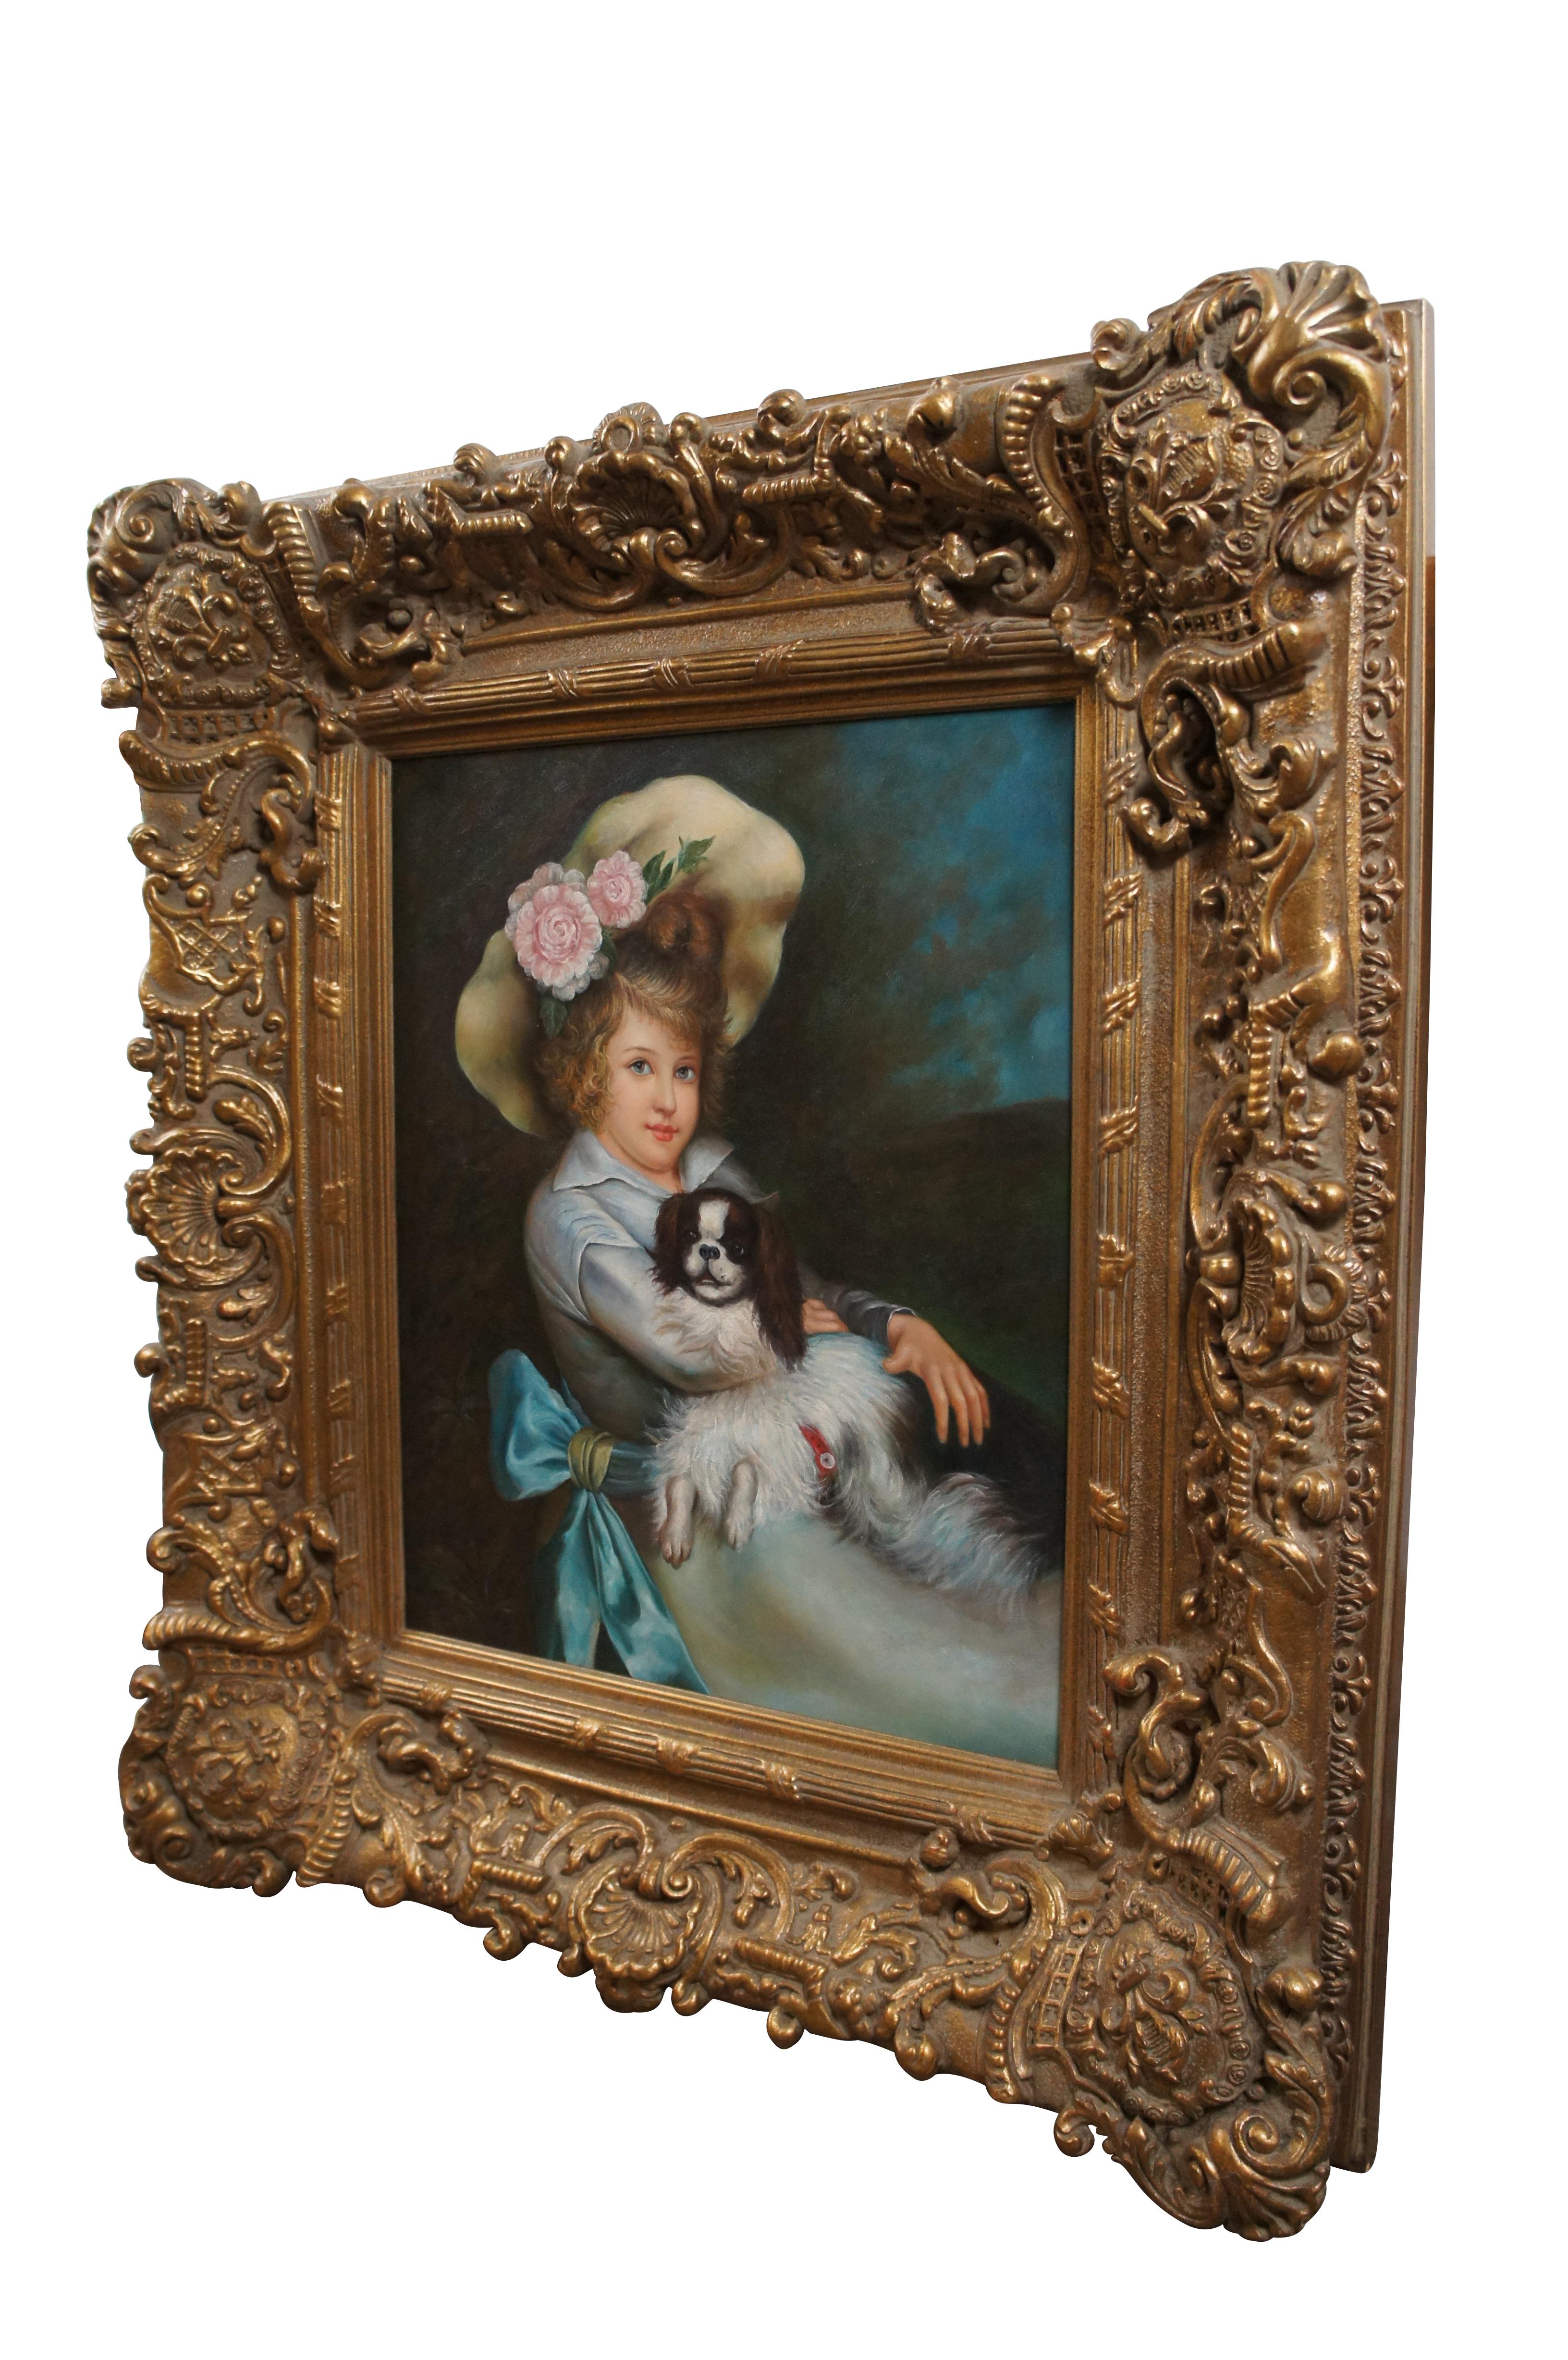 Late 20th century hand painted reproduction oil on canvas portrait painting after “Best of Friends” by Harry Humphrey Moore, showing a young girl in a flowered hat and blue sash, holding a brown and white King Charles Spaniel dog on her lap.